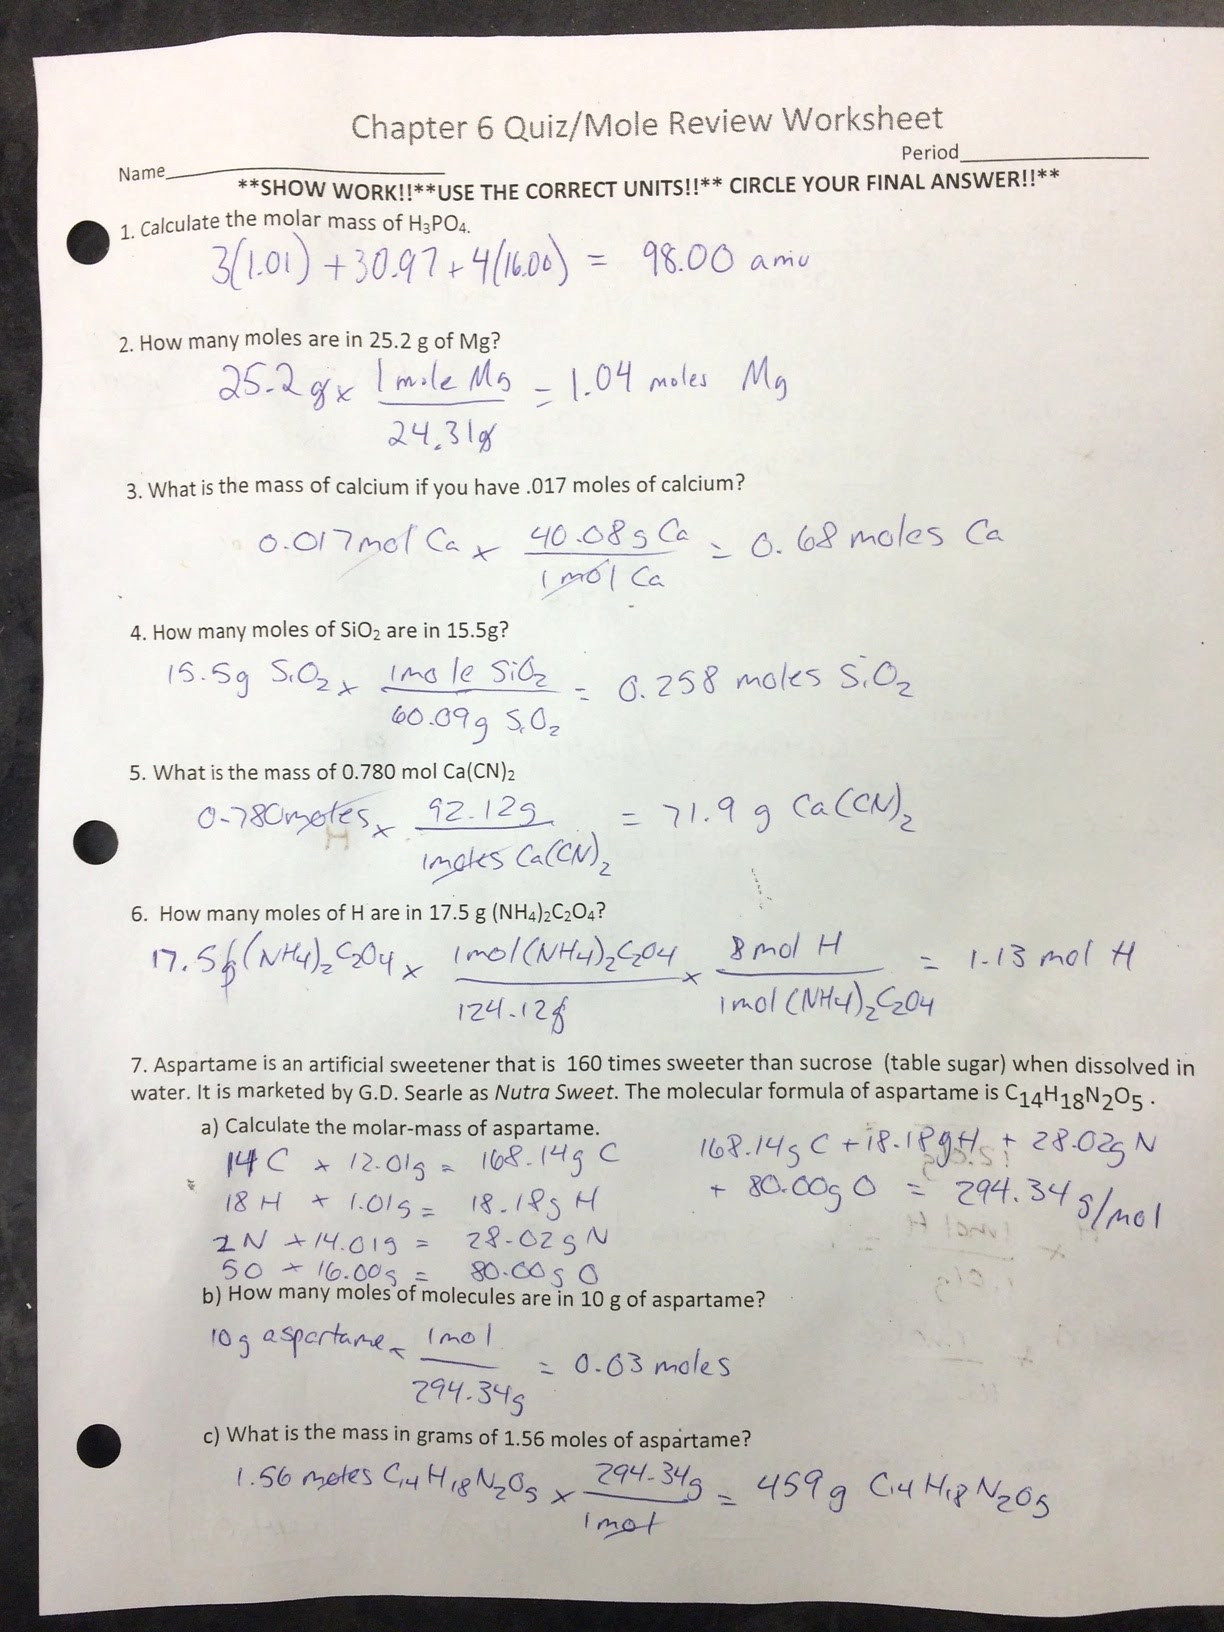 Chemistry Review Worksheet Answers assignments Labs Erhs Chemistry with Mr Stagg